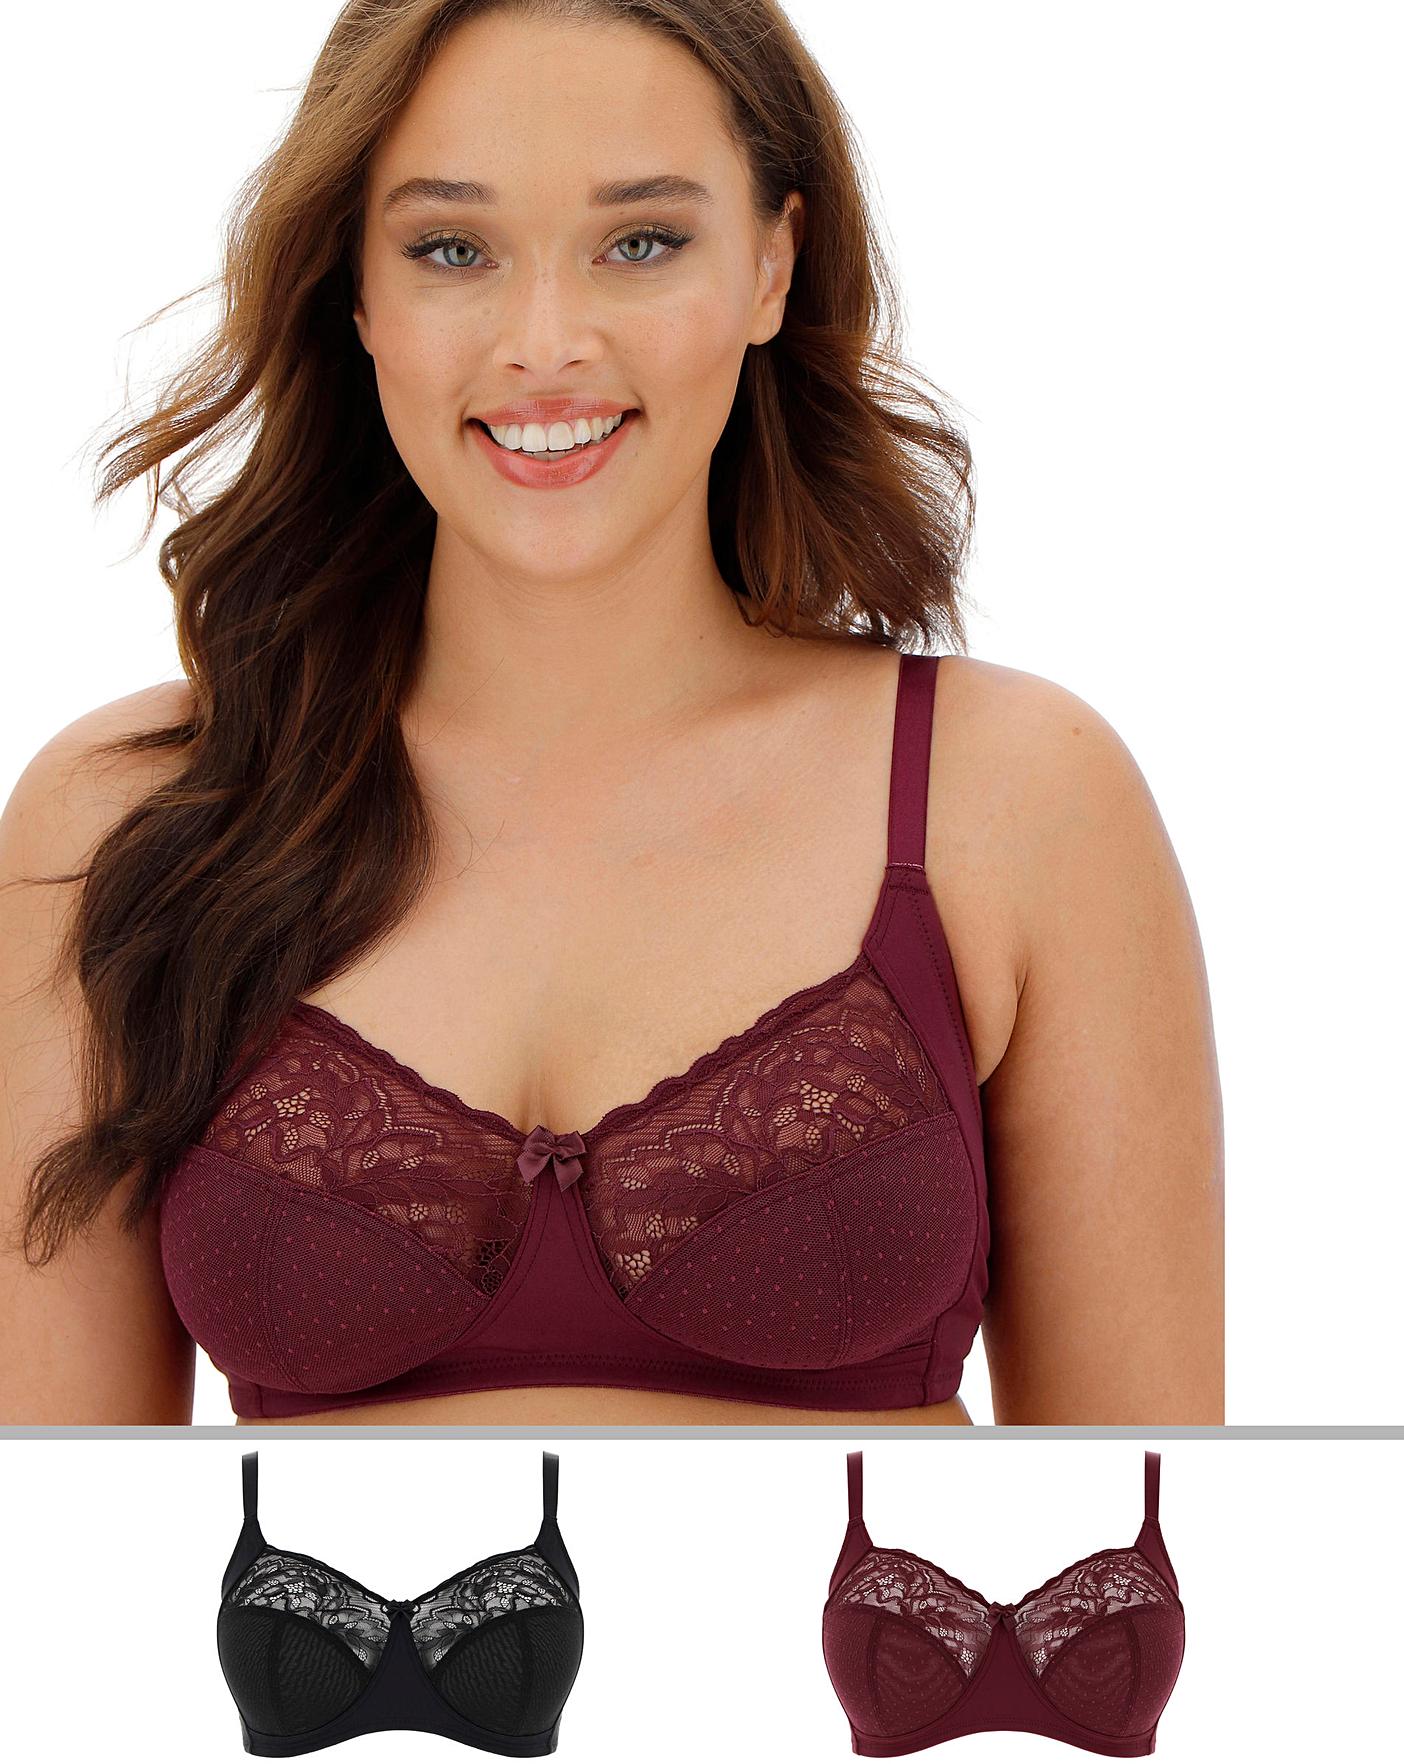 wired or non wired bra